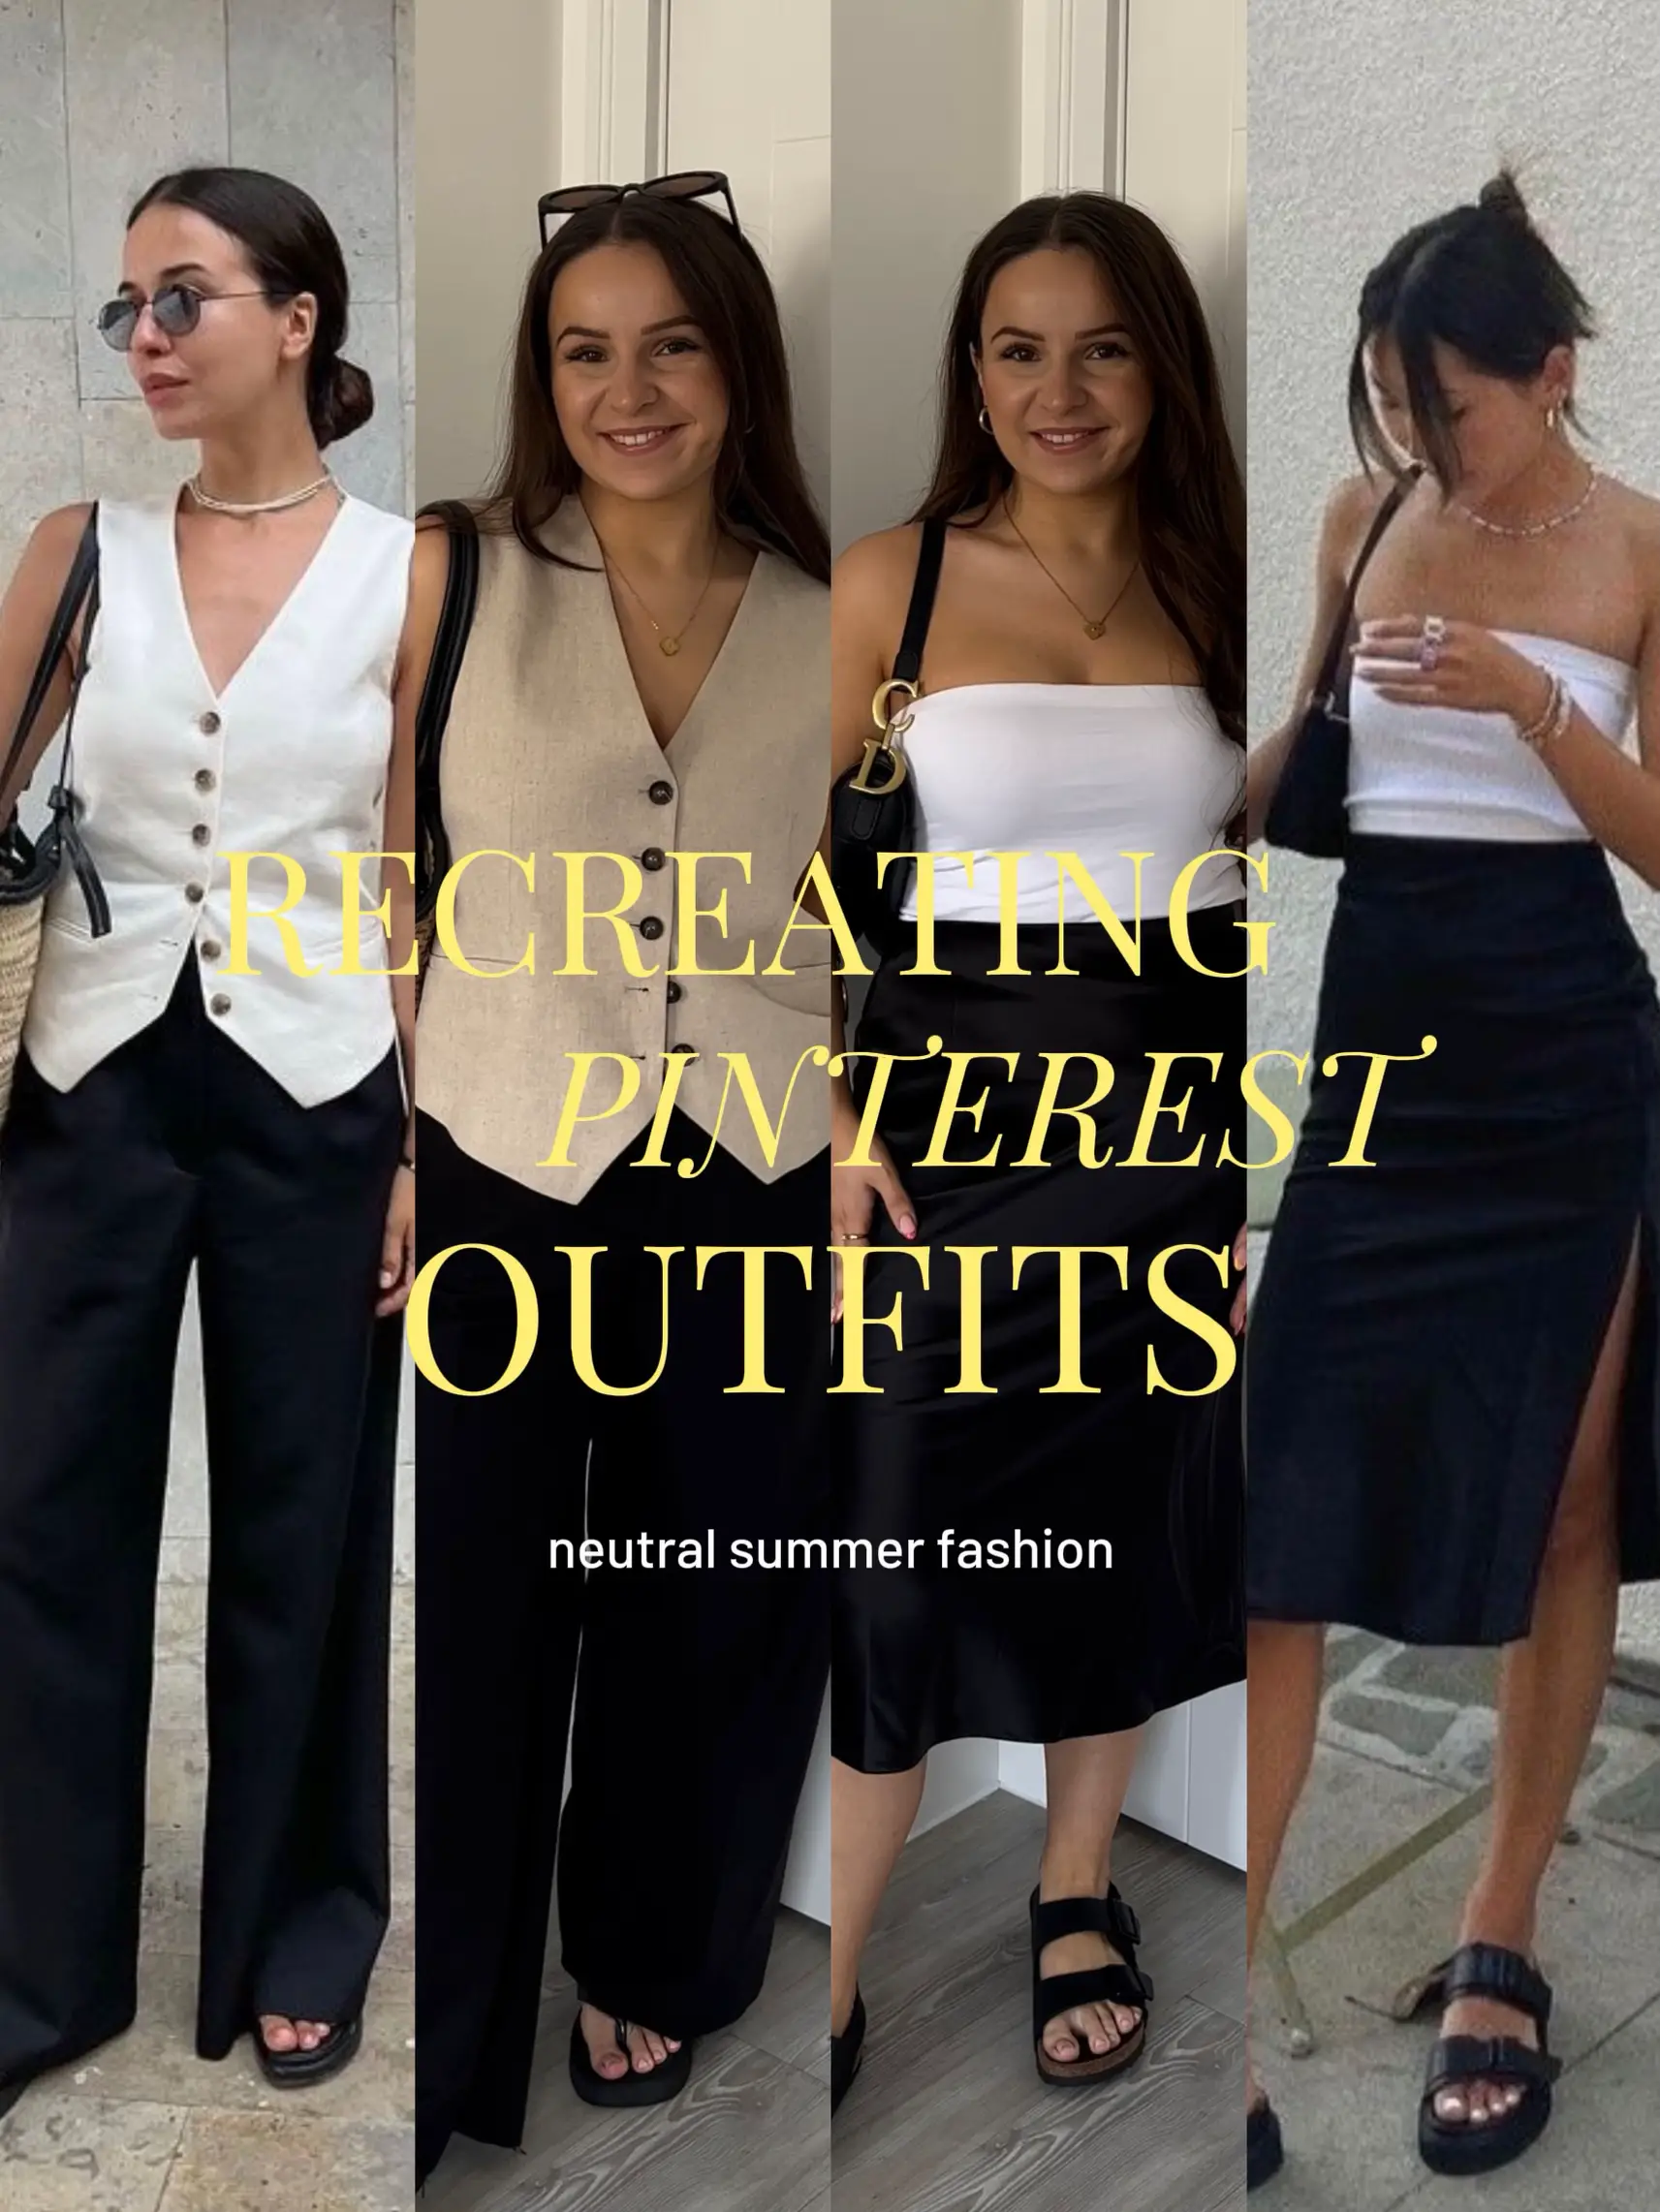 Wardrobe Wednesday: Recreating Pinterest Outfits (Classy Neutral